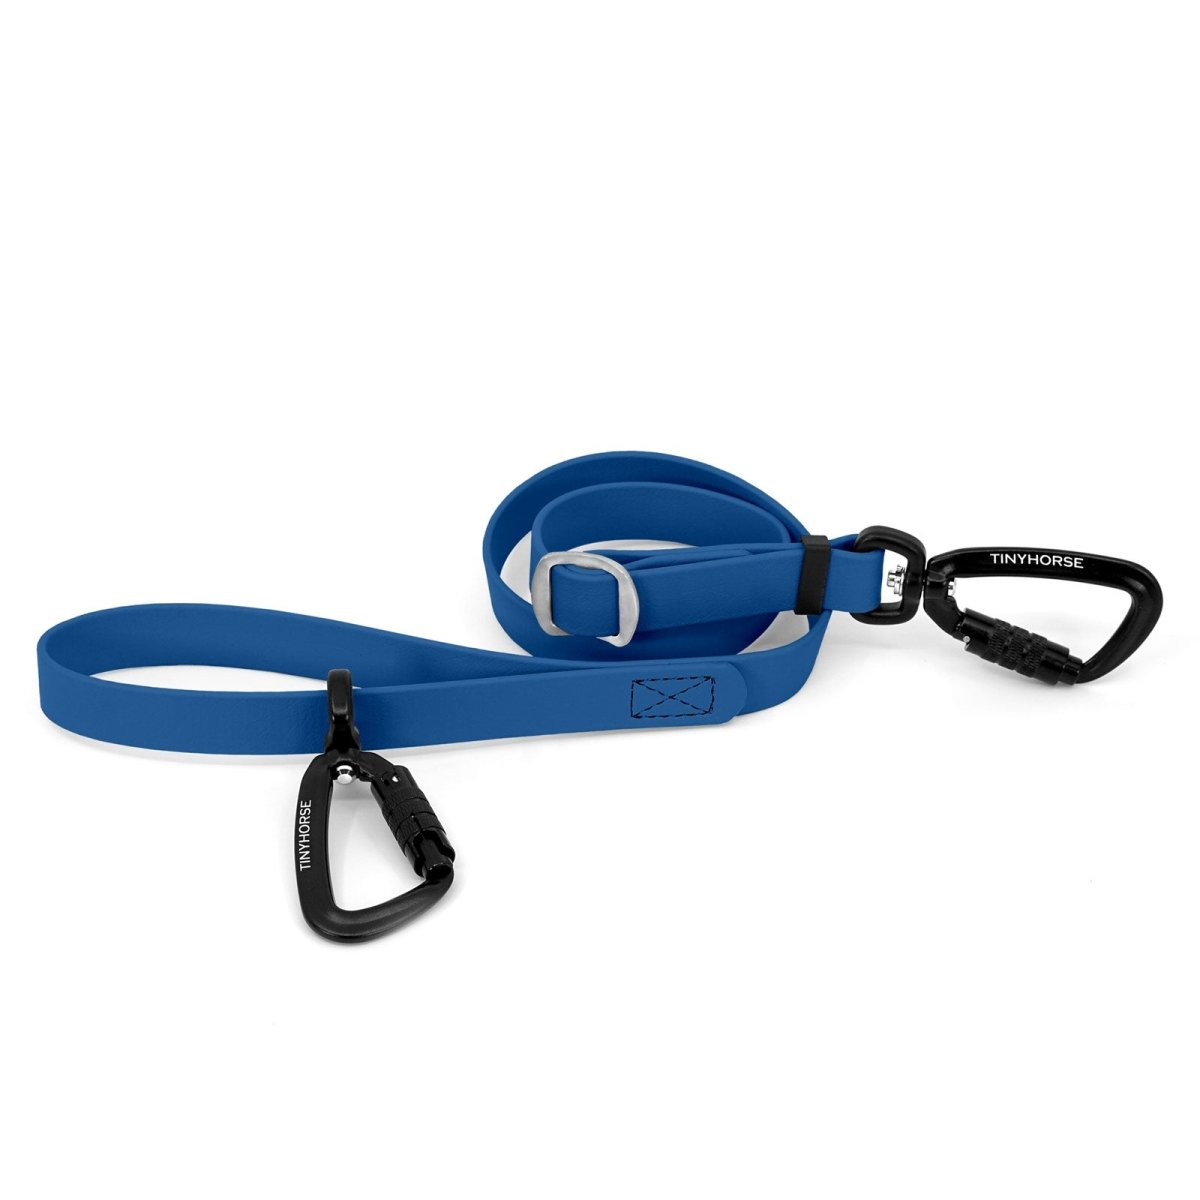 An adjustable bay blue-coloured Lead-All Pro made of BioThane with 2 auto-locking carabiners